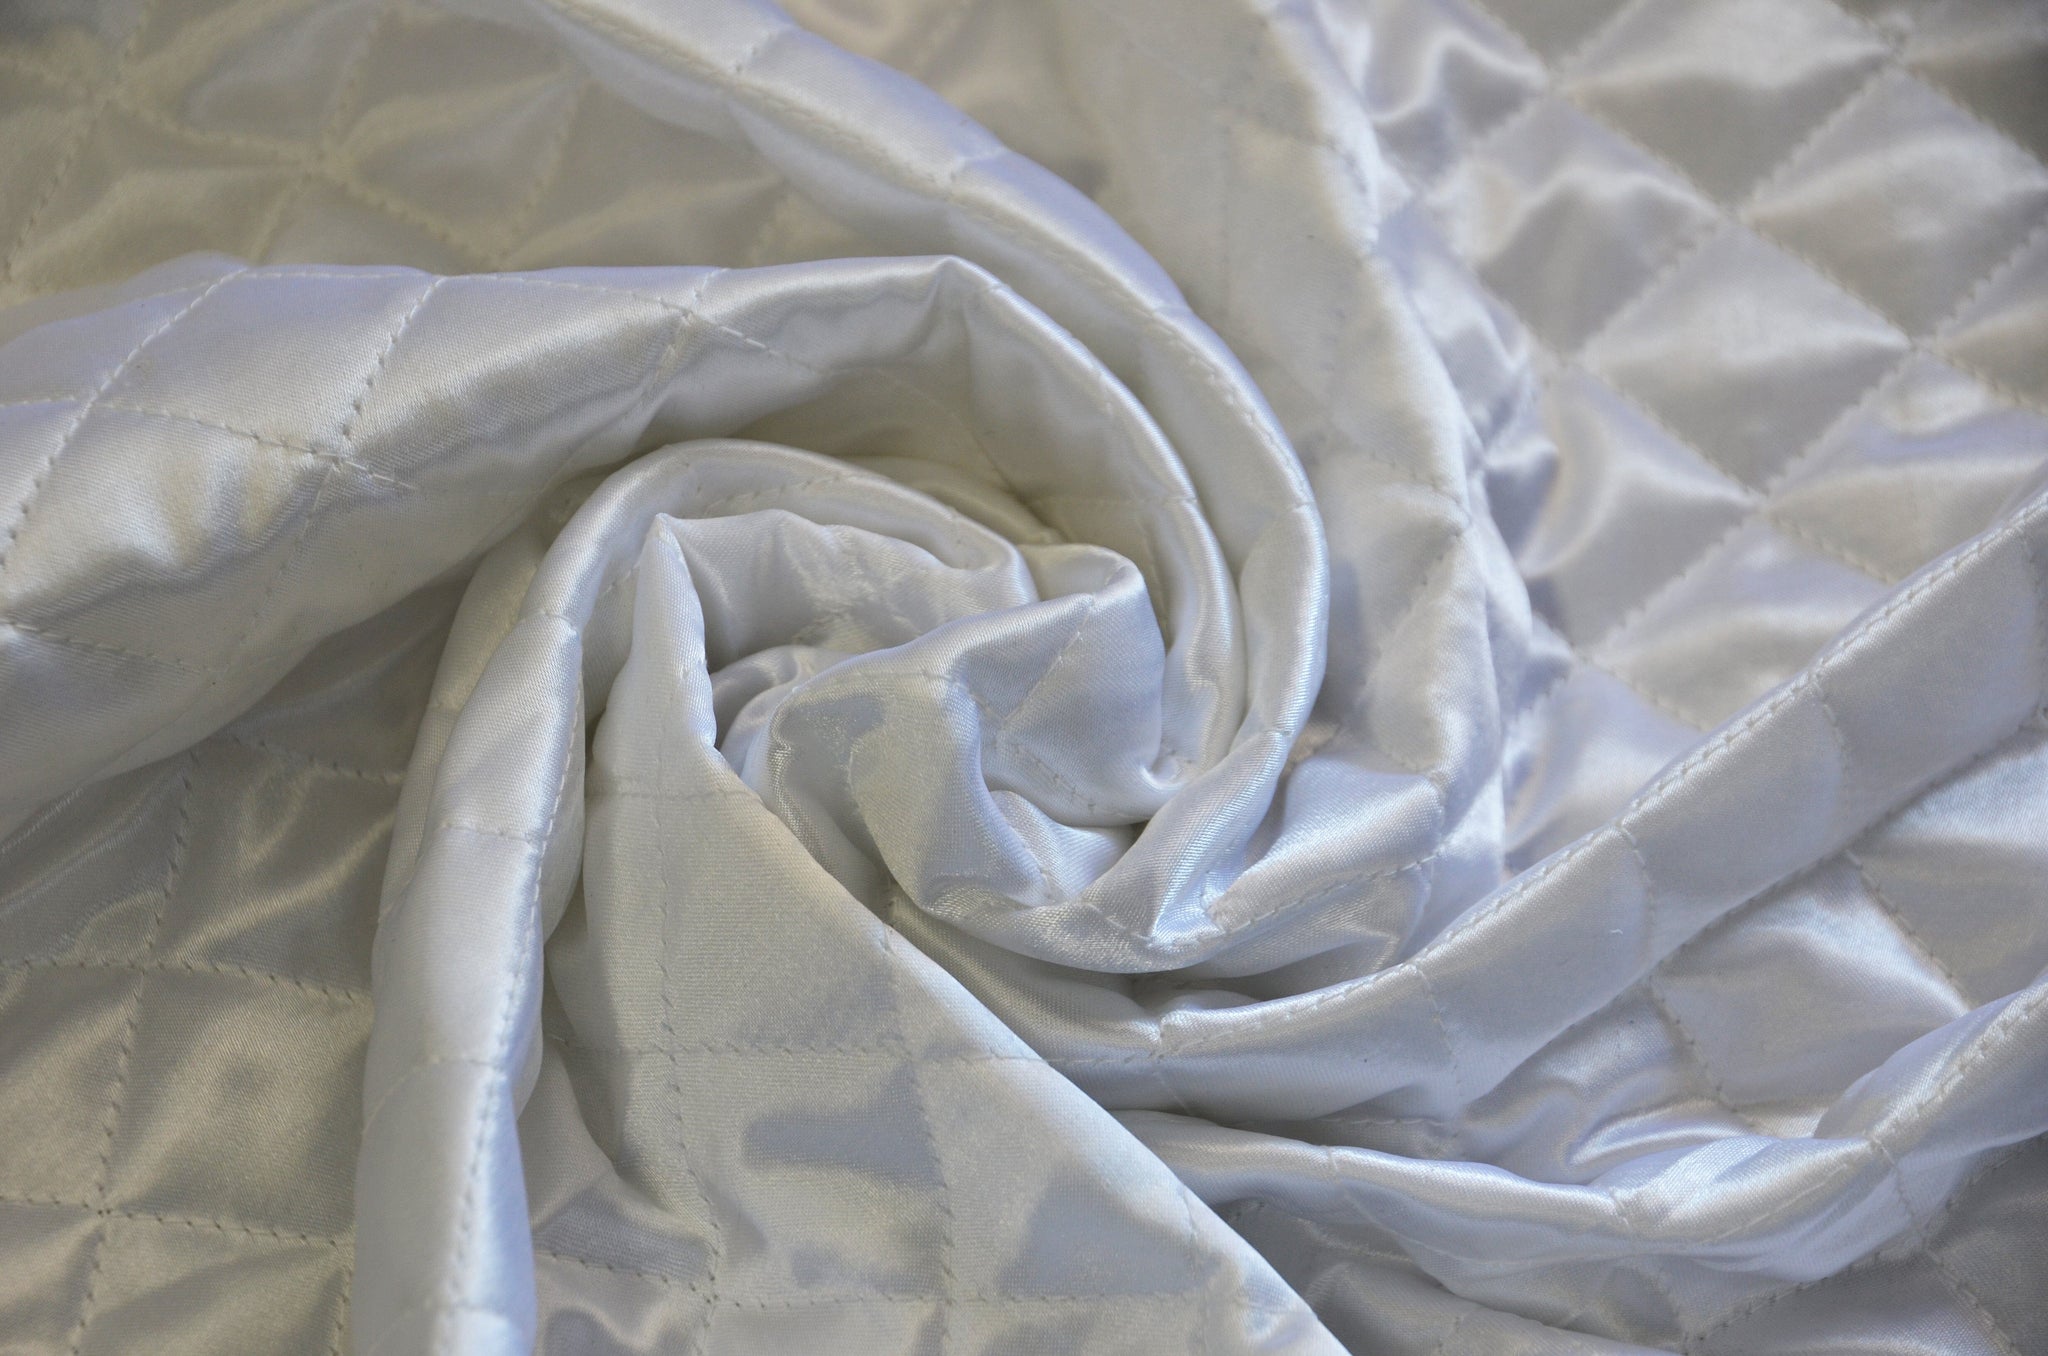 Quilted Satin Batting Fabric | 60 Wide | Padded Quilted Super Soft Satin |  Silky Satin Quilted Padded Fabric | Jacket Liner Fabric 